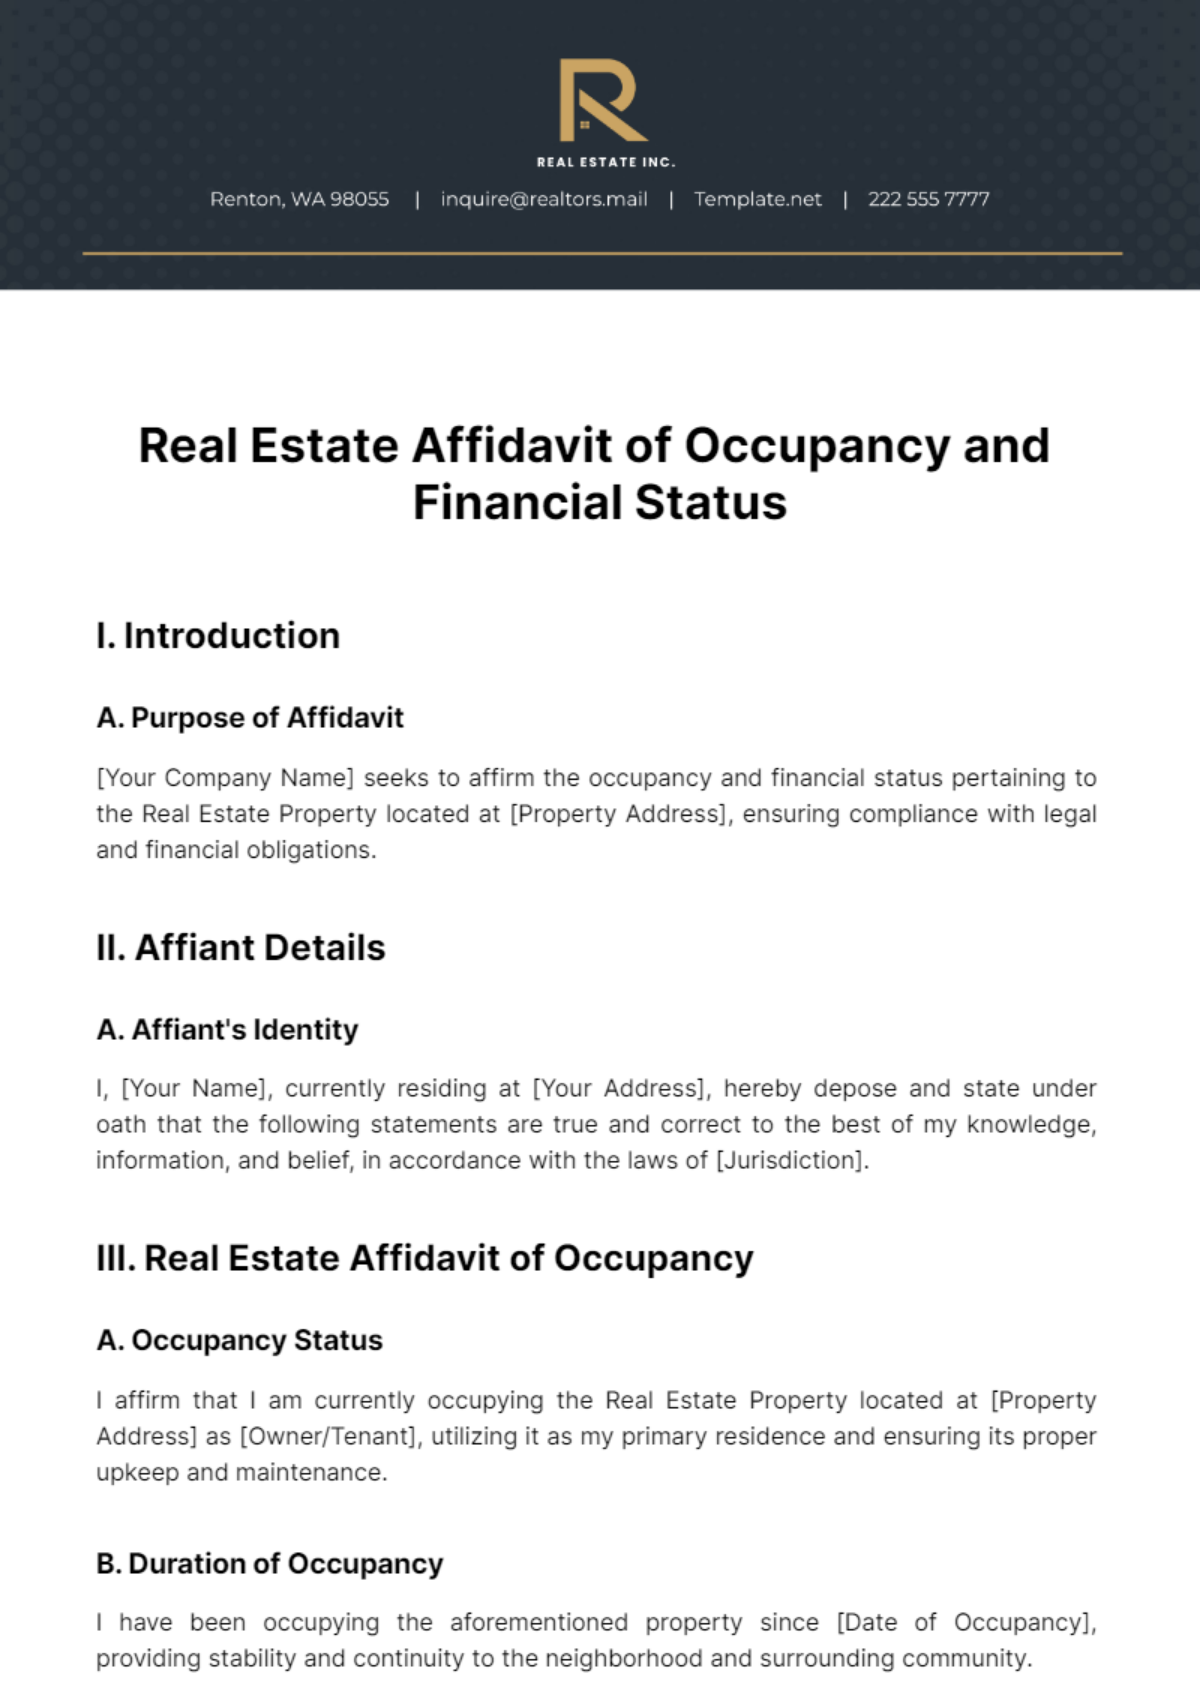 Free Real Estate Affidavit of Occupancy and Financial Status Template